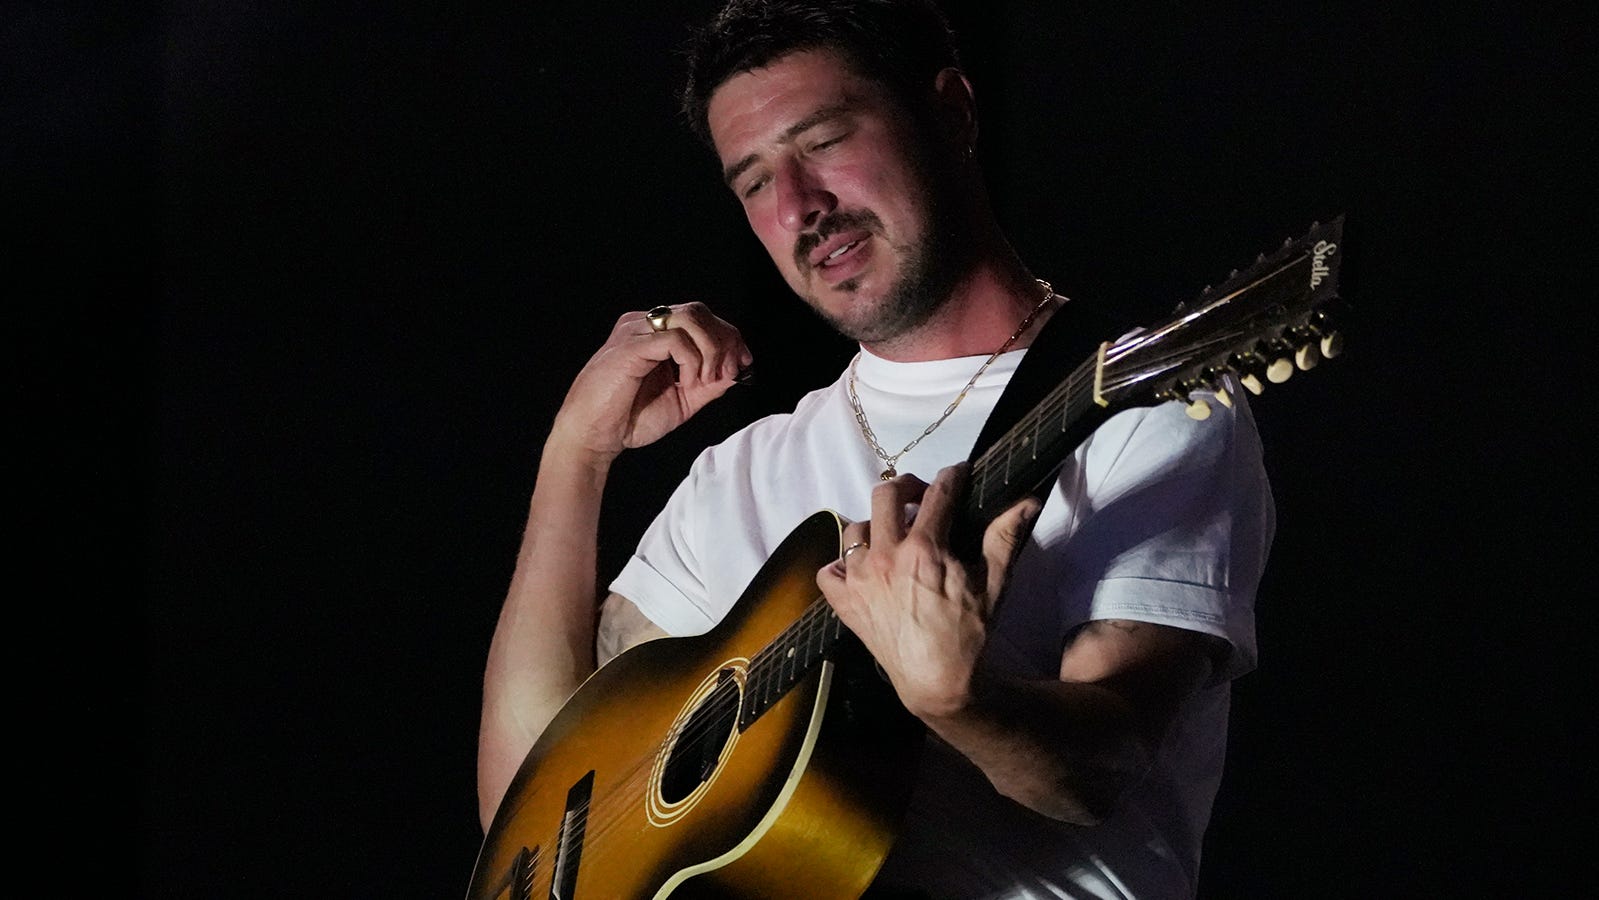 Marcus Mumford features new solo songs, plus a Taylor Swift surprise, at ACL Fest